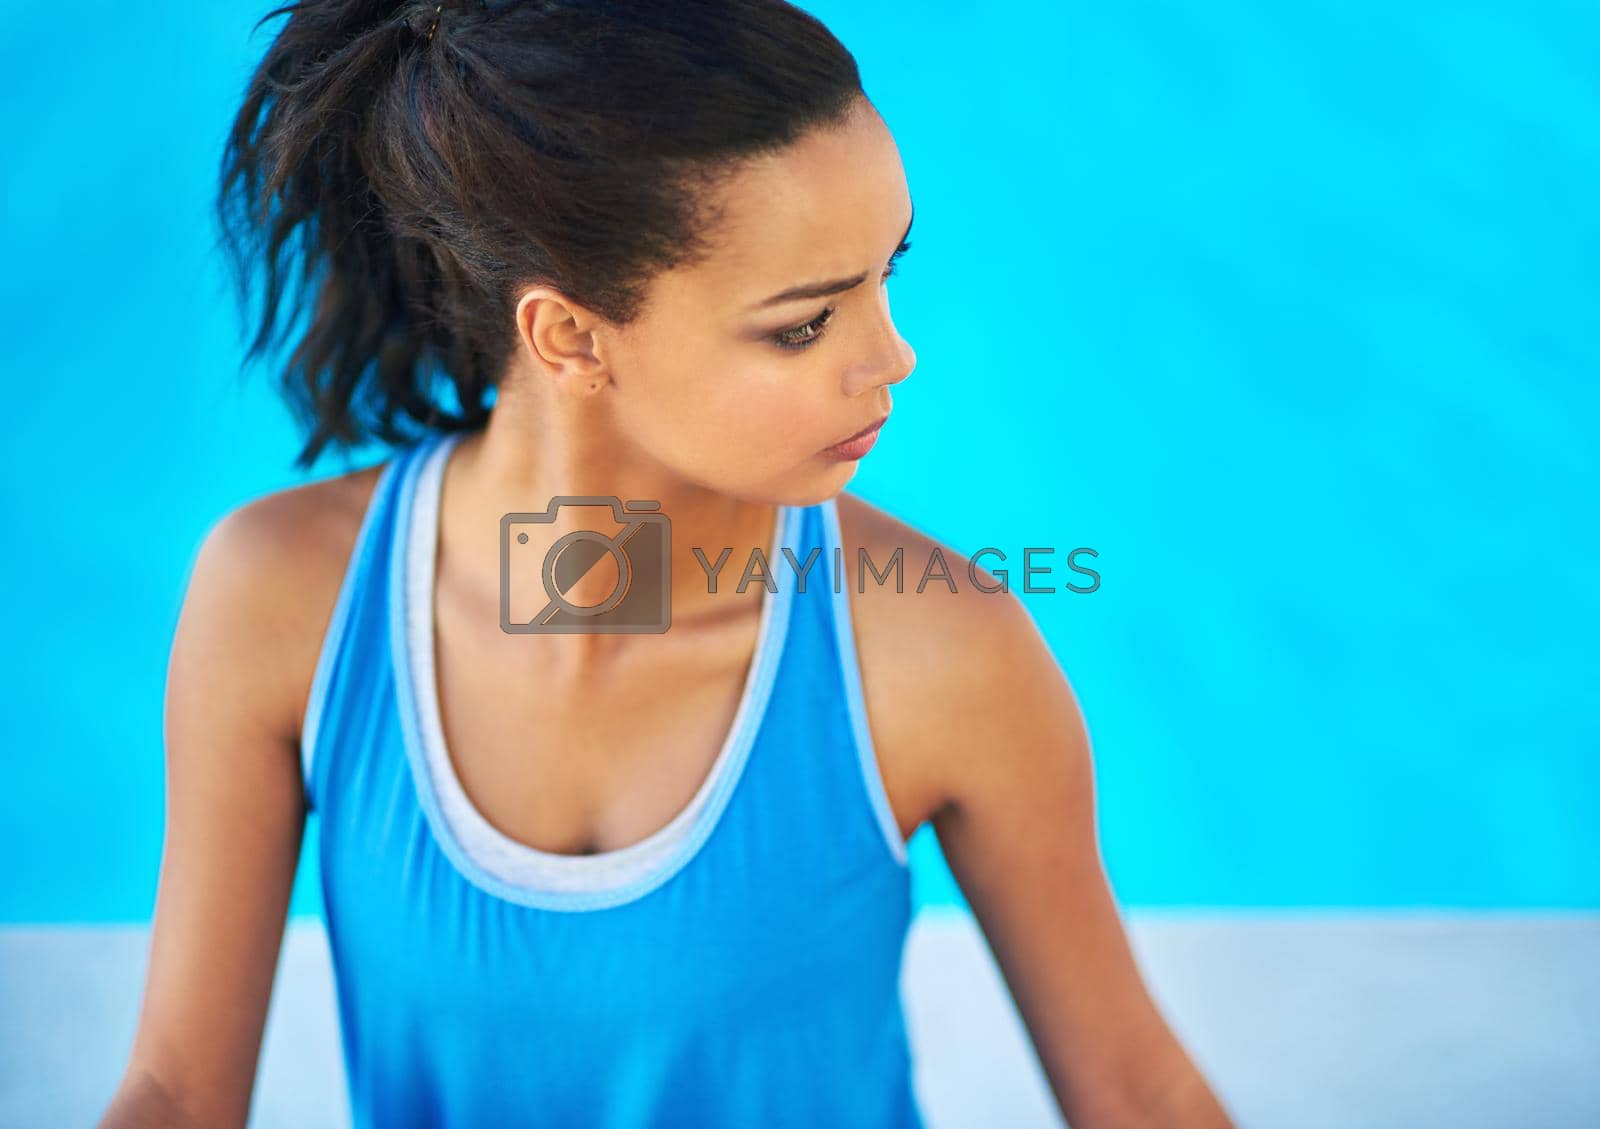 Keep calm and do yoga. a young woman doing yoga outdoors